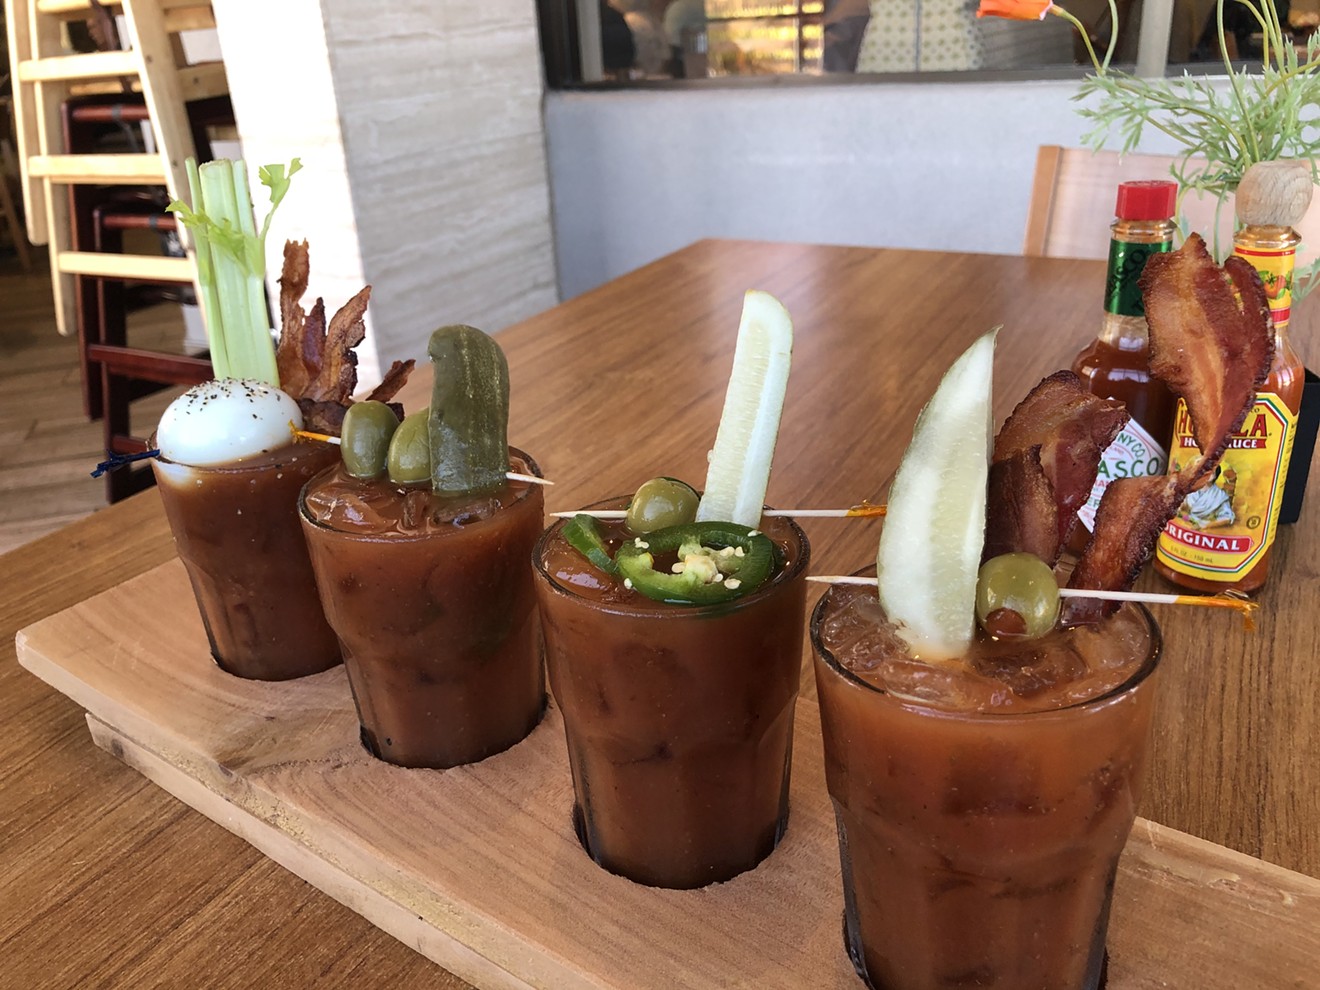 There's now a bloody mary flight at U.S. Egg.